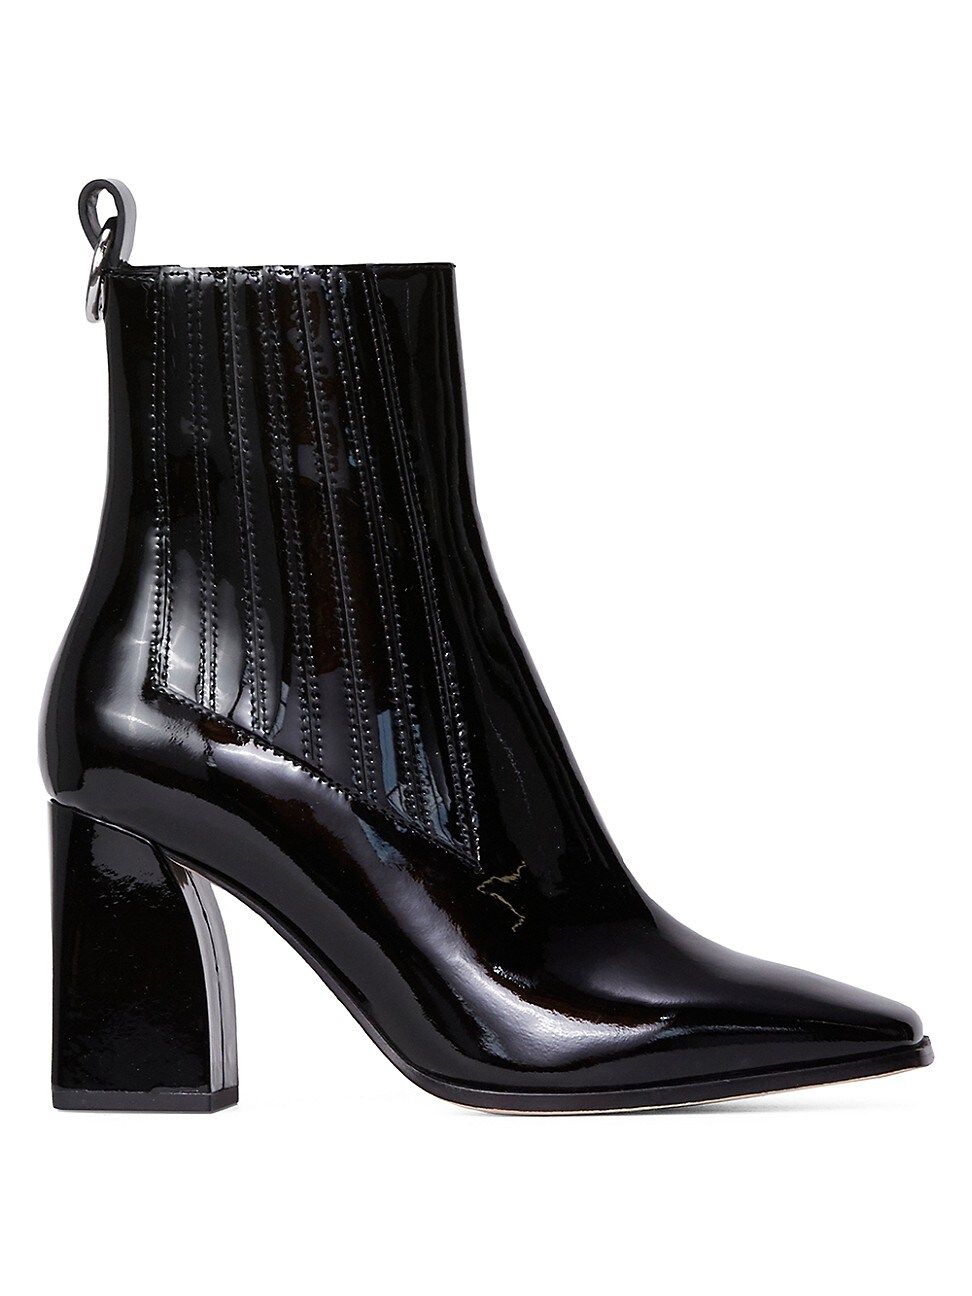 Paige Frankie Patent Leather Boots | Saks Fifth Avenue